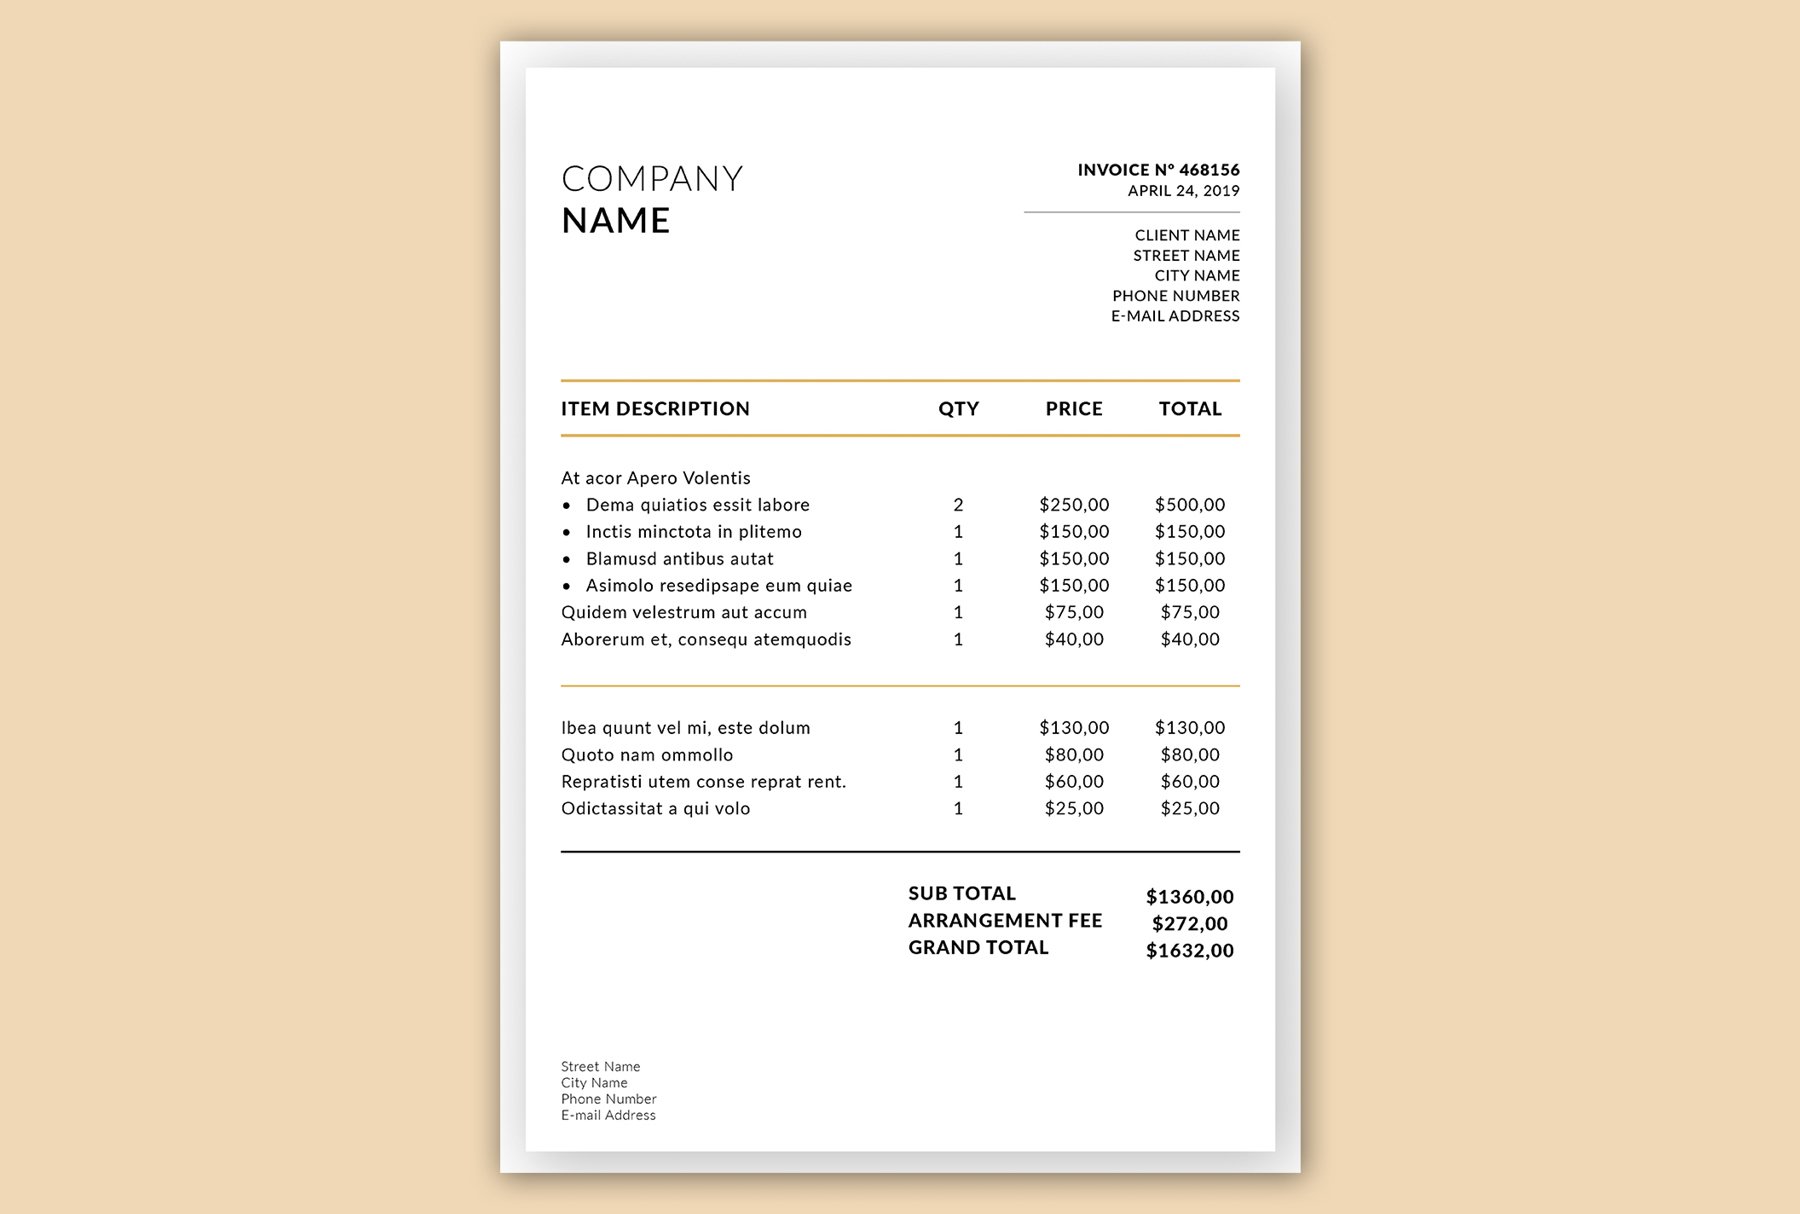 Business Invoice Layout Template cover image.